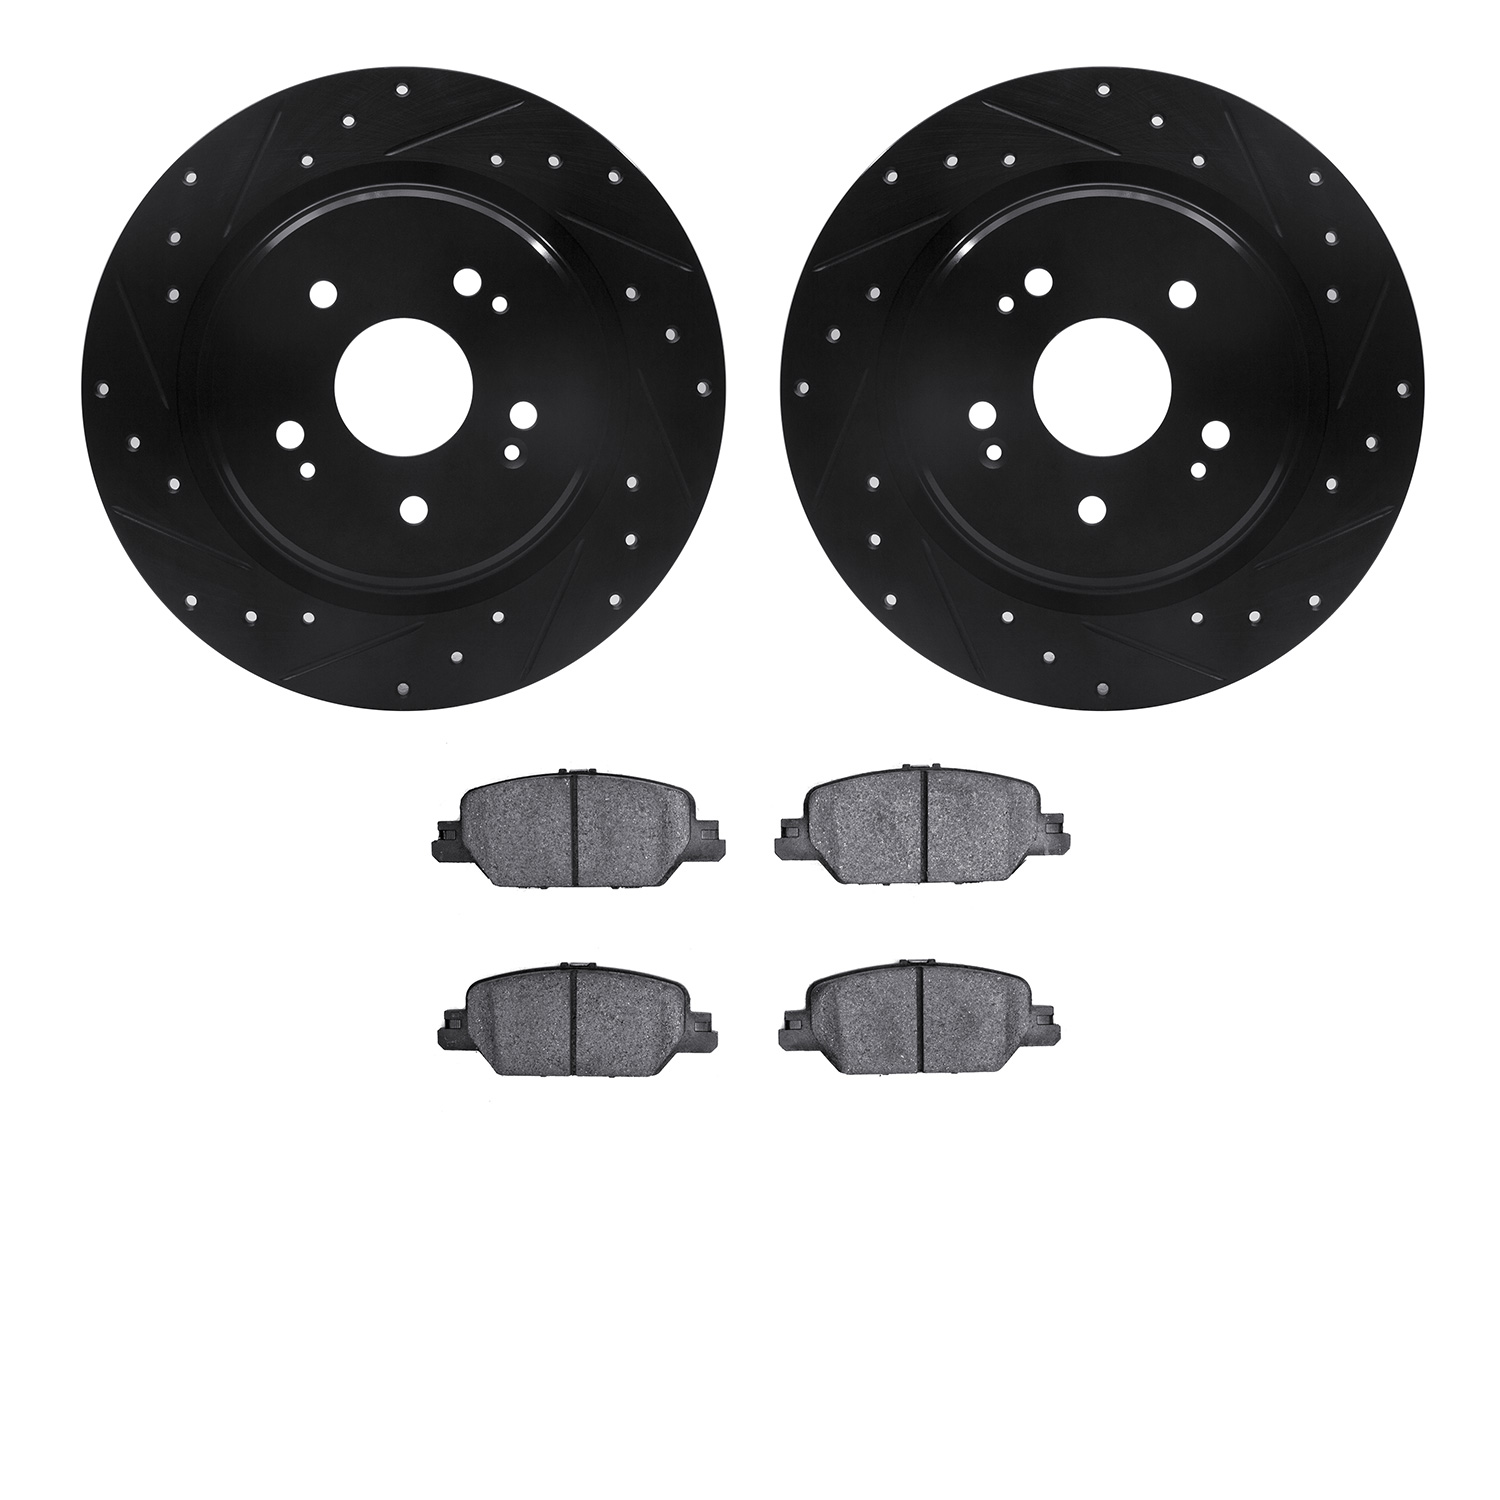 8302-58034 Drilled/Slotted Brake Rotors with 3000-Series Ceramic Brake Pads Kit [Black], Fits Select Acura/Honda, Position: Rear